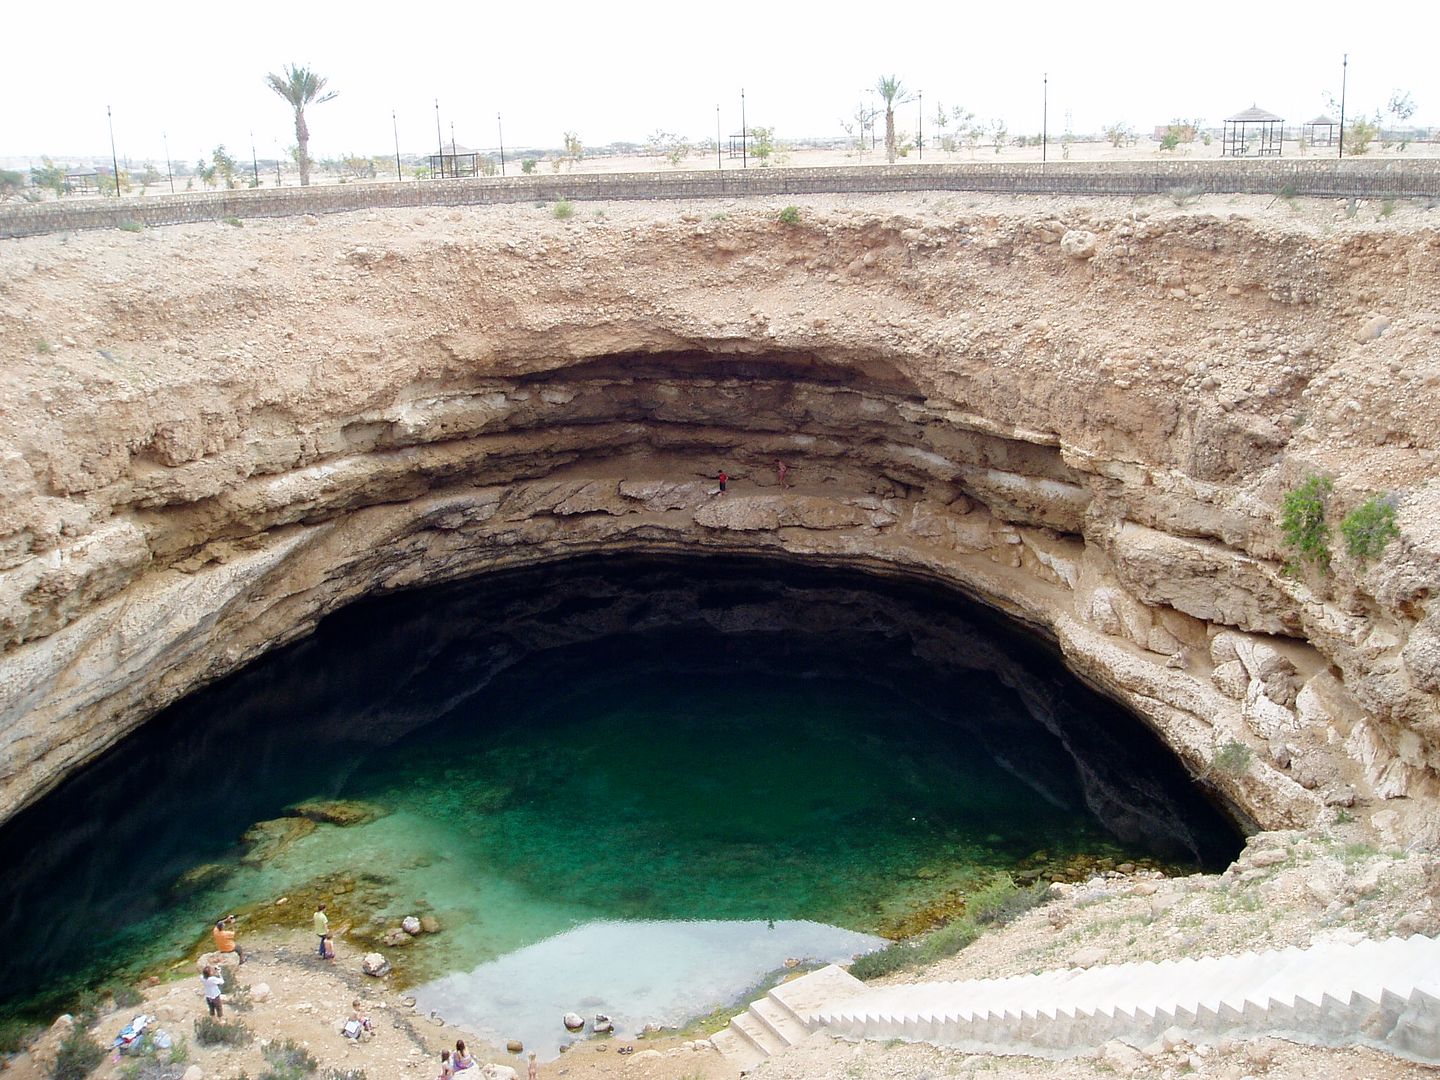 2012.01.18, A sinkhole with great swimming! (Oman)